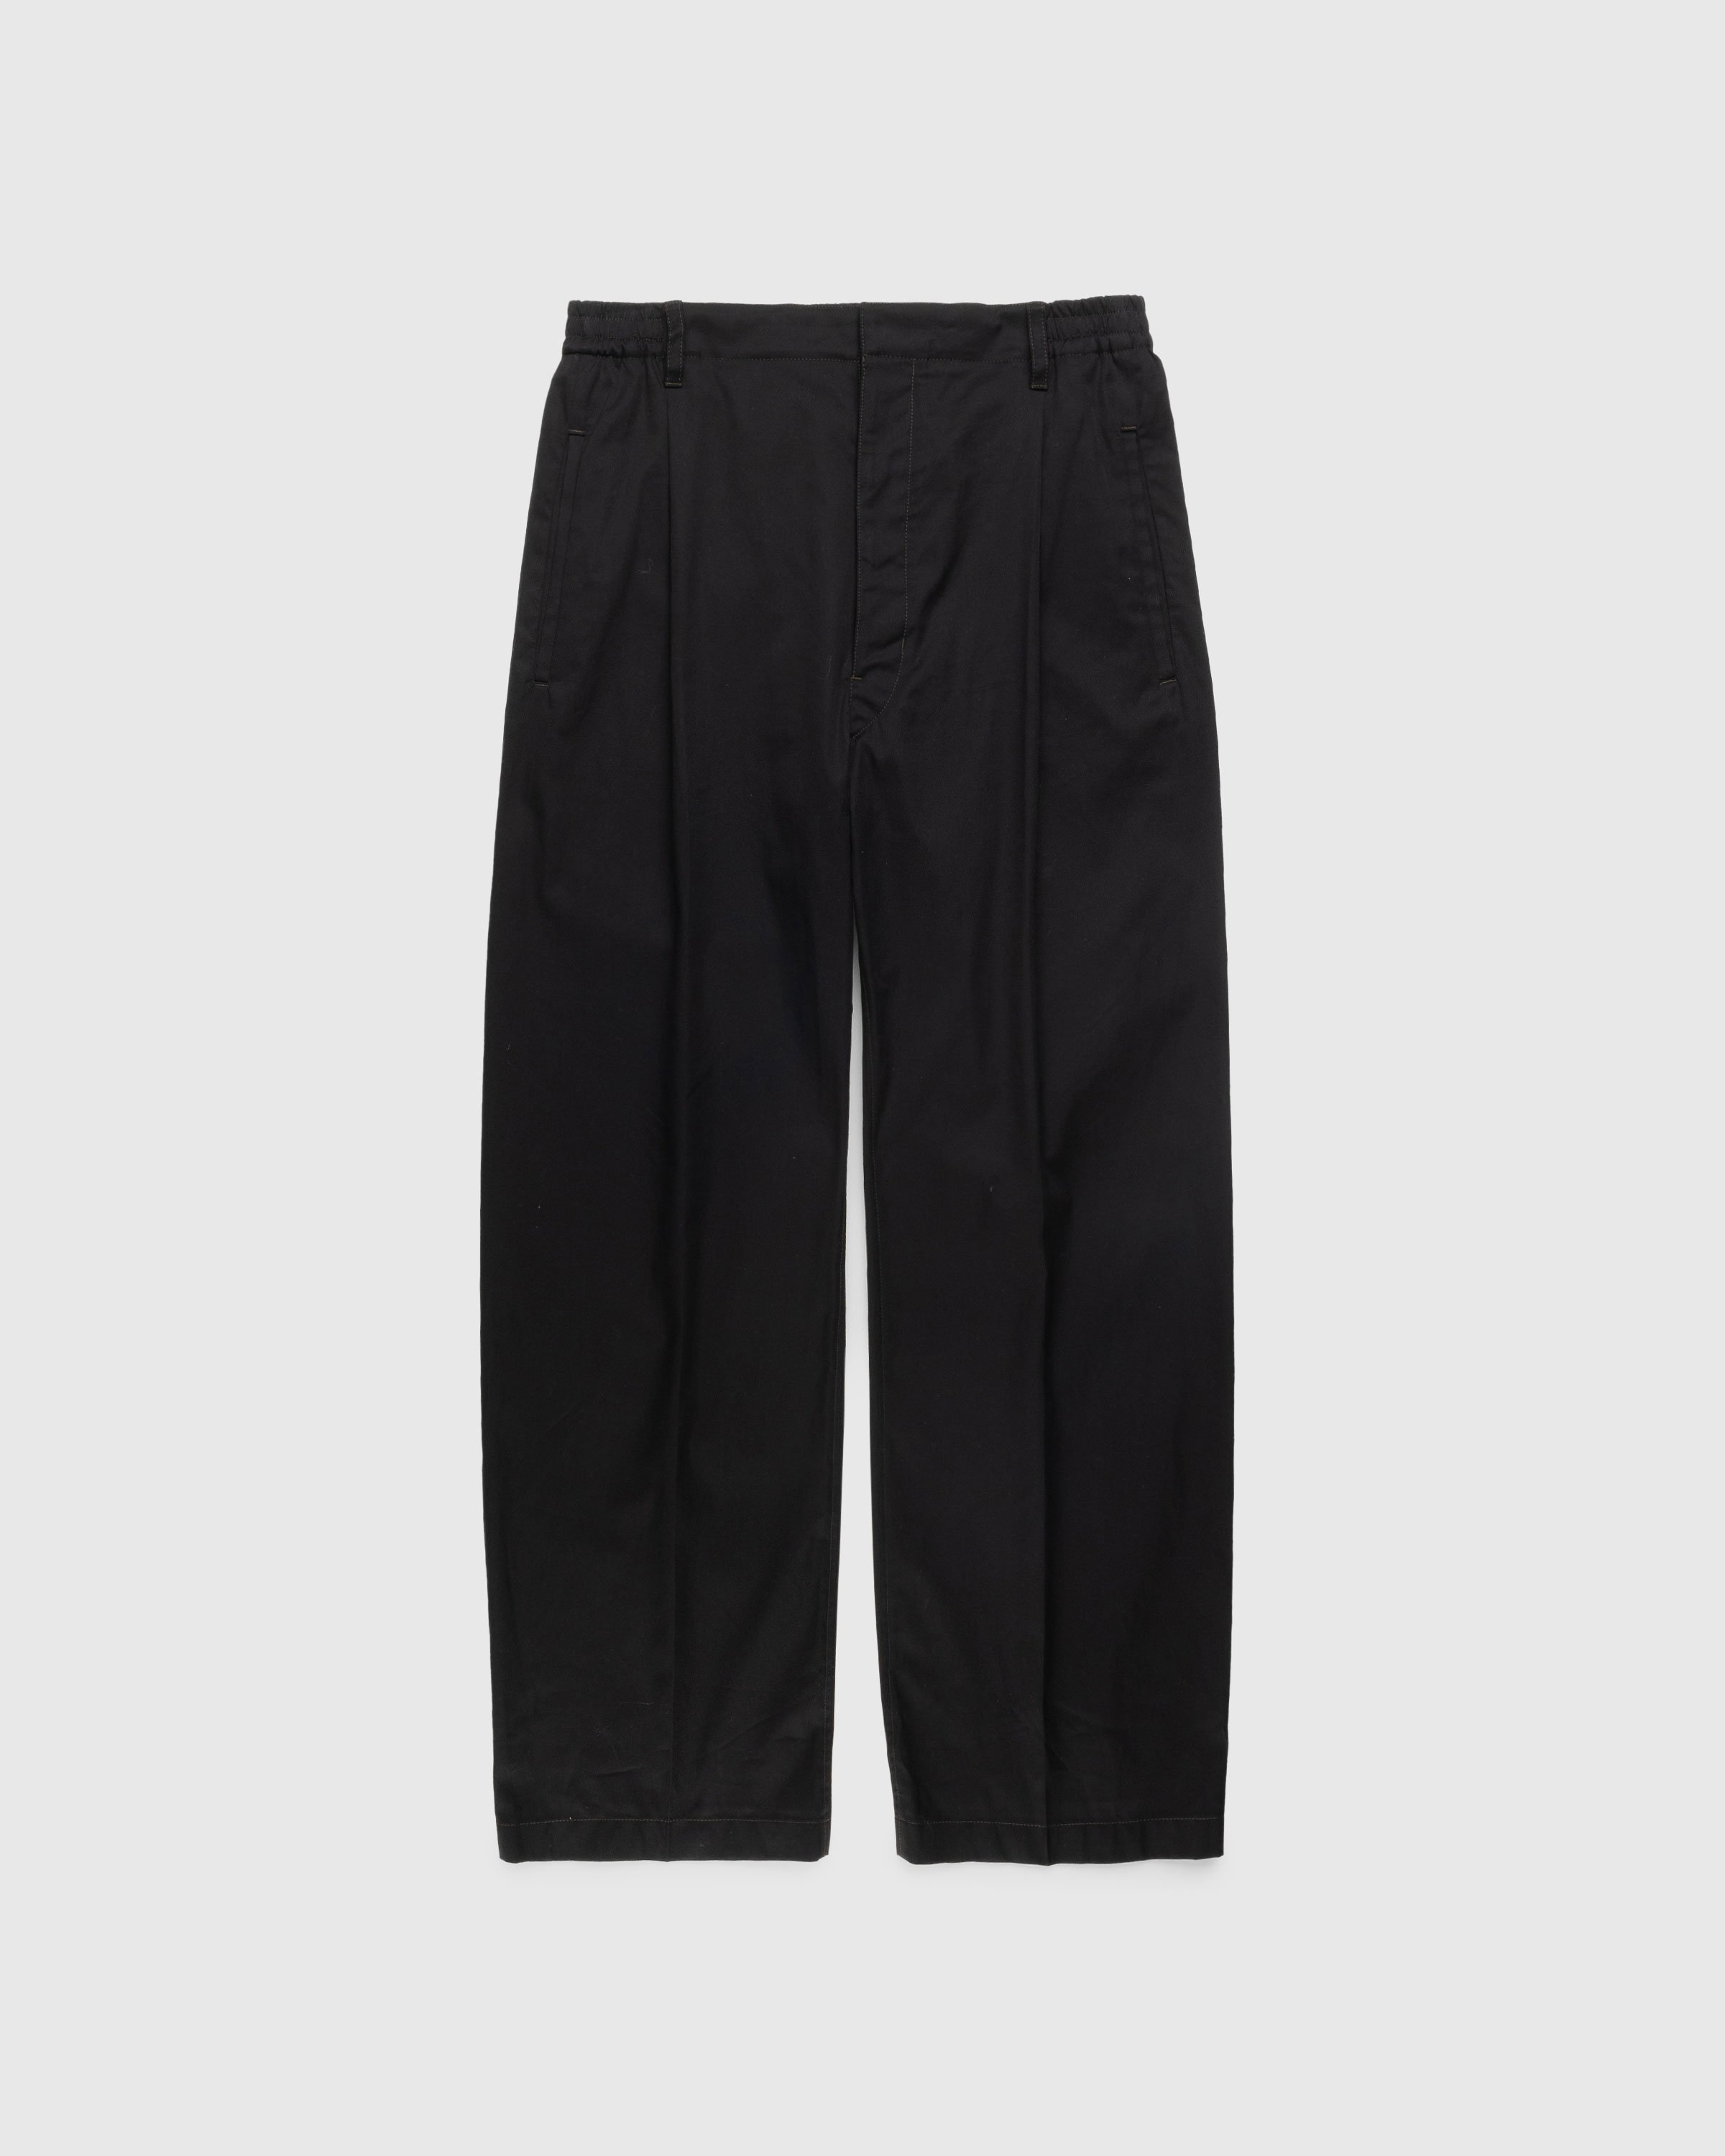 Lemaire - Easy Pleated Pants Black - Clothing - Black - Image 1